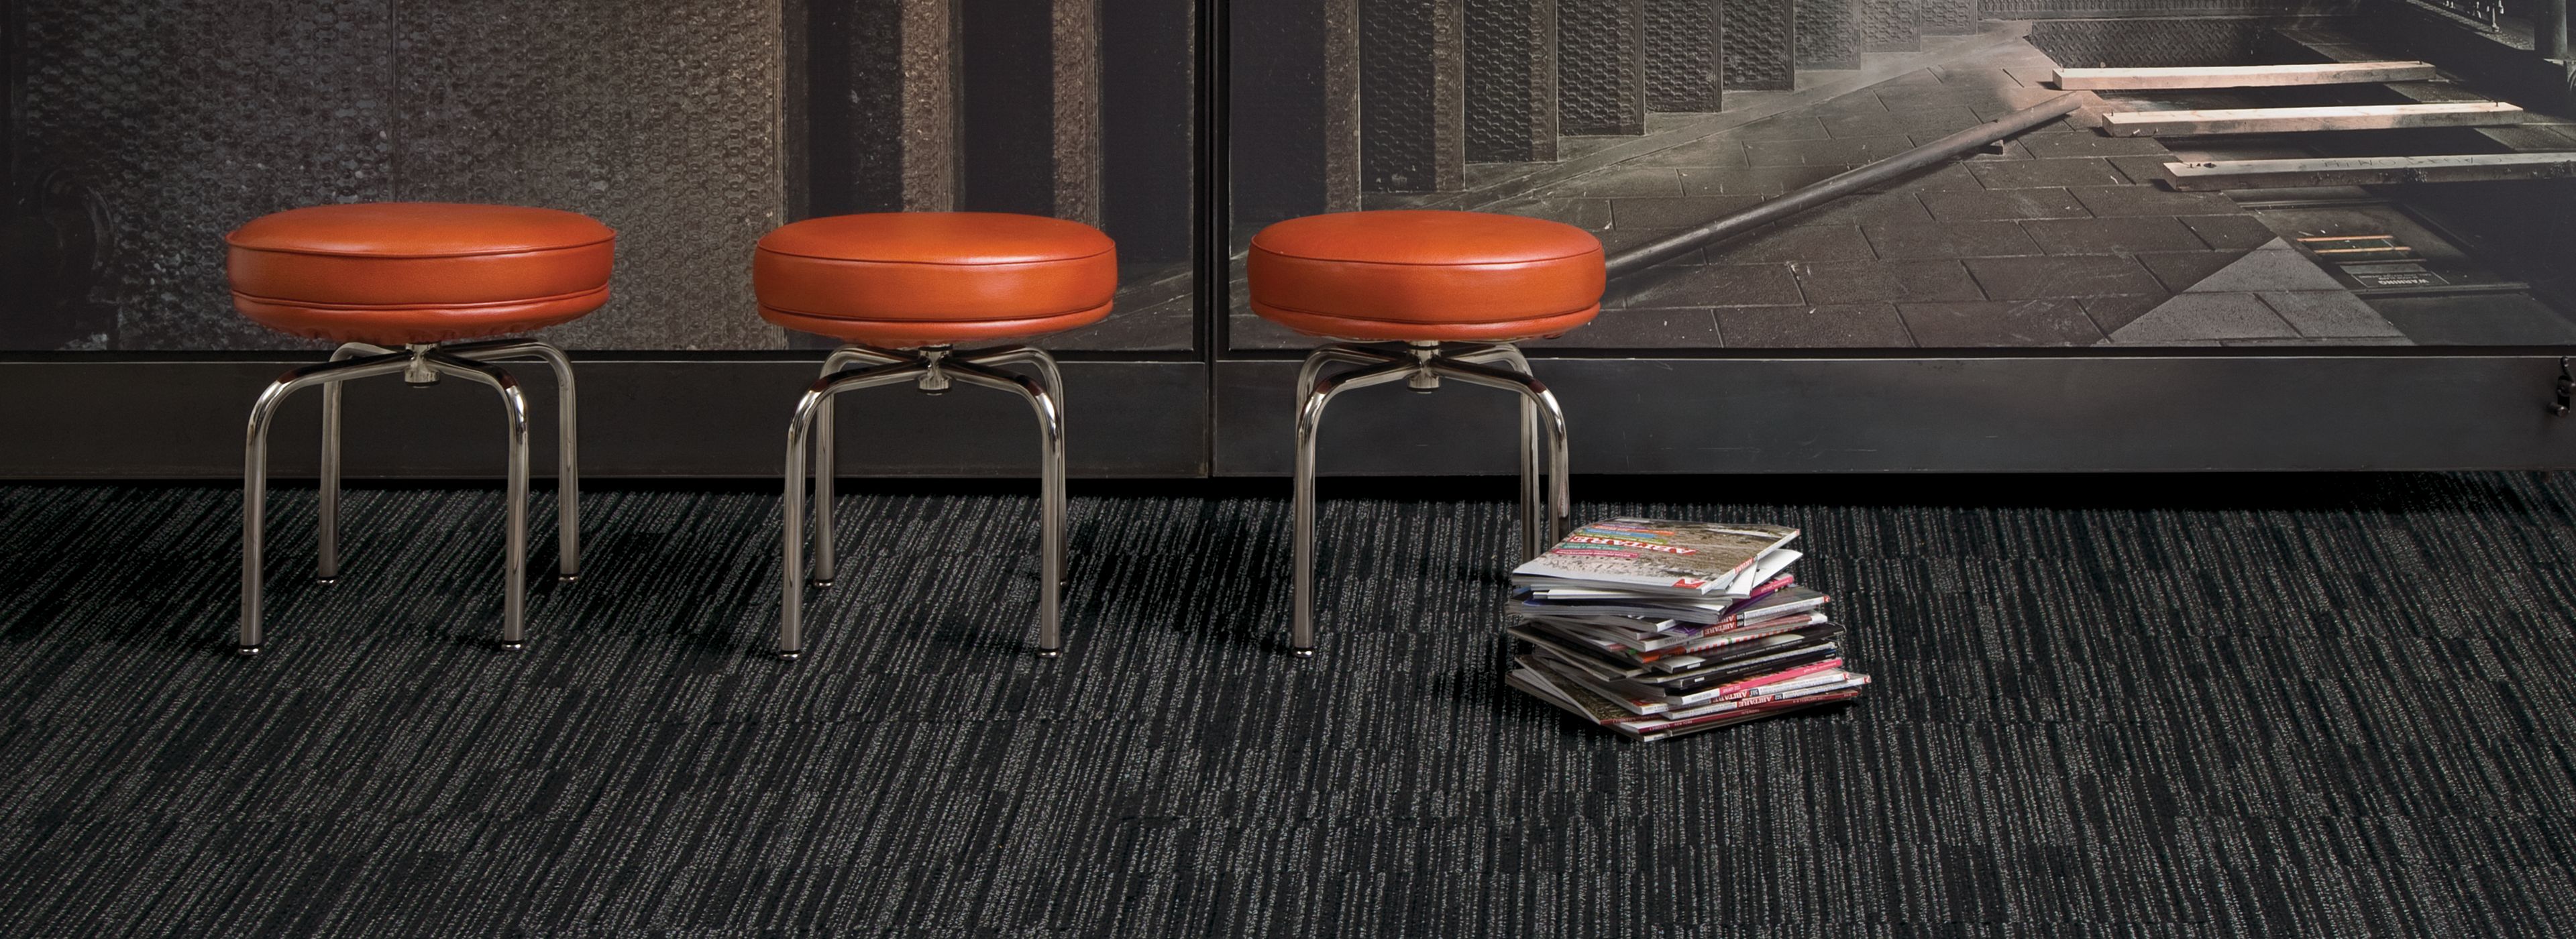 Interface CT102 carpet tile in open area with three red stools and stack of books imagen número 1